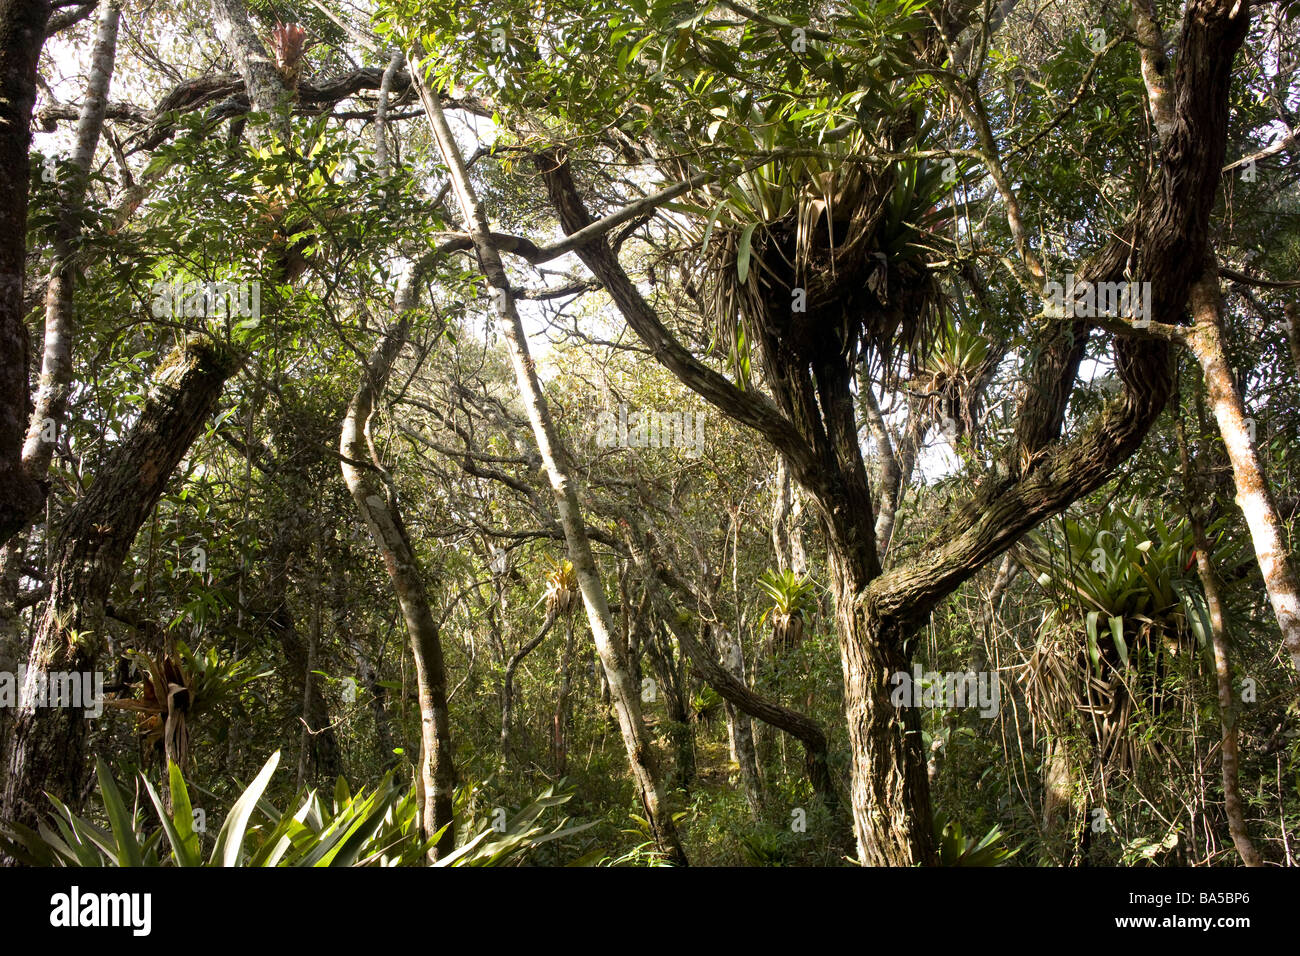 Forest scene with bromelias. Stock Photo